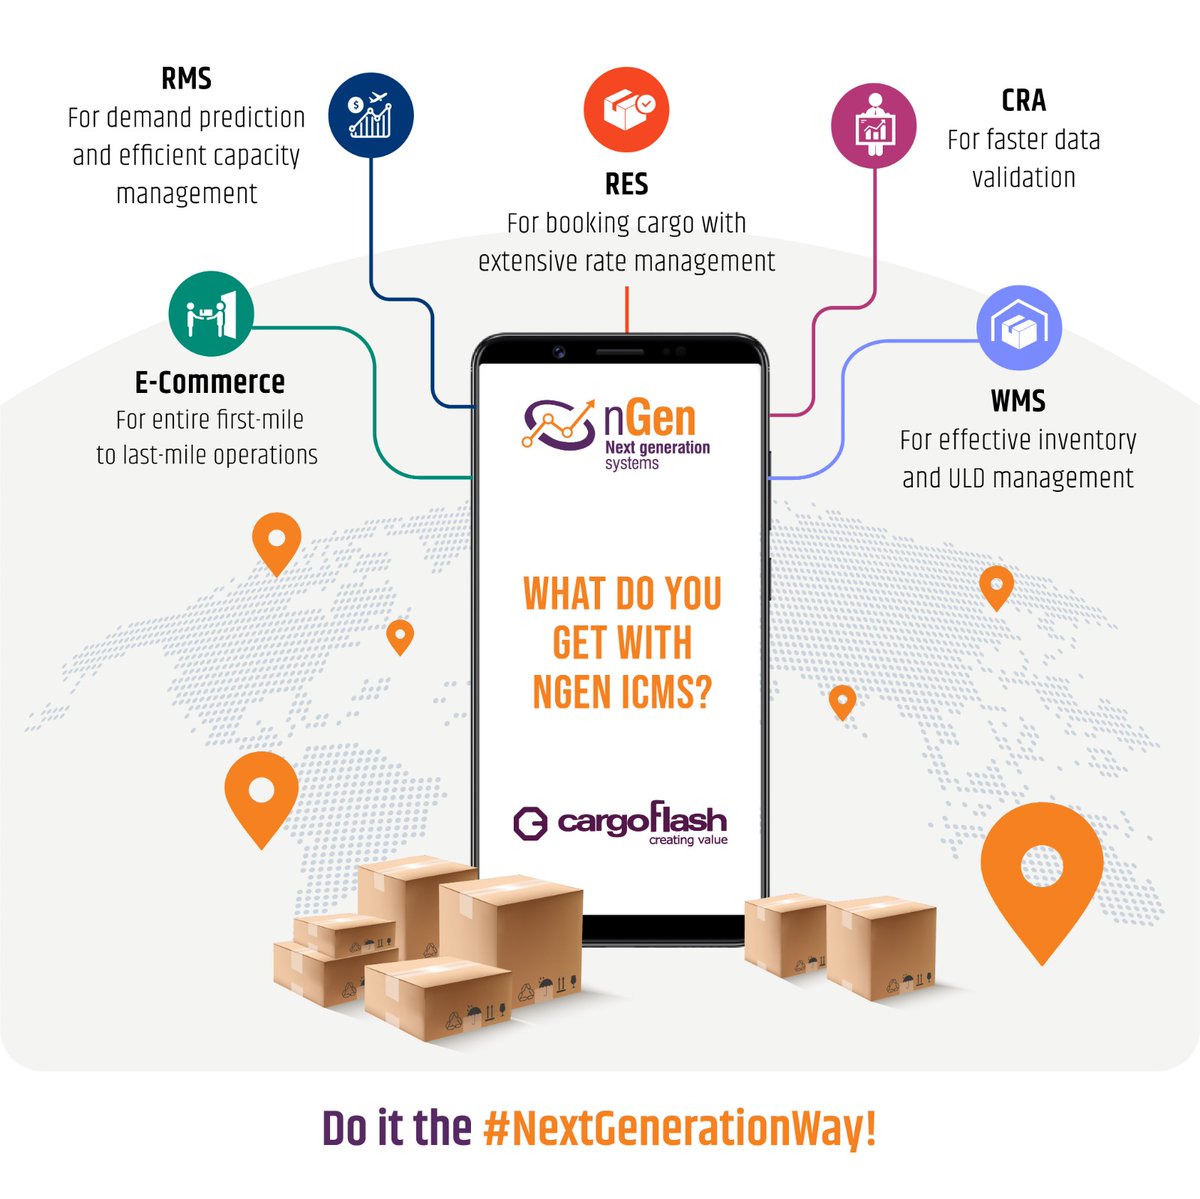 Ready to do it the #NextGenerationWay?

Upgrade to nGen ICMS - the ultimate integrated solution customised solutions to match your unique business requirements.

.

.

#aviationindustry #logisticssolutions #itsolutions #LoveLogistics #digitalisation #Cargoflash